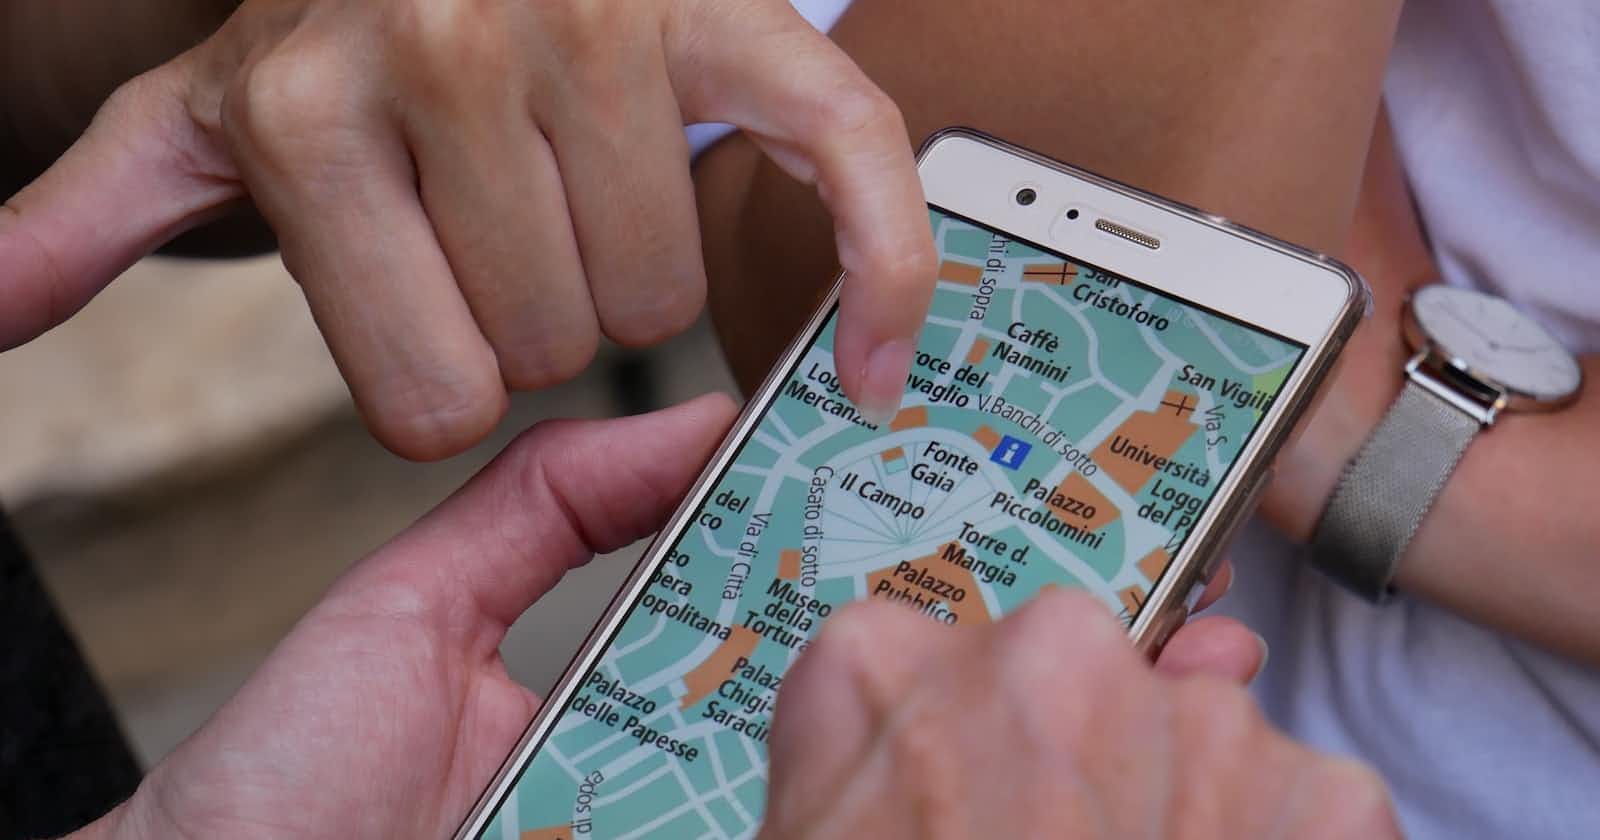 How to Track Someone On Google Maps Without Them Knowing